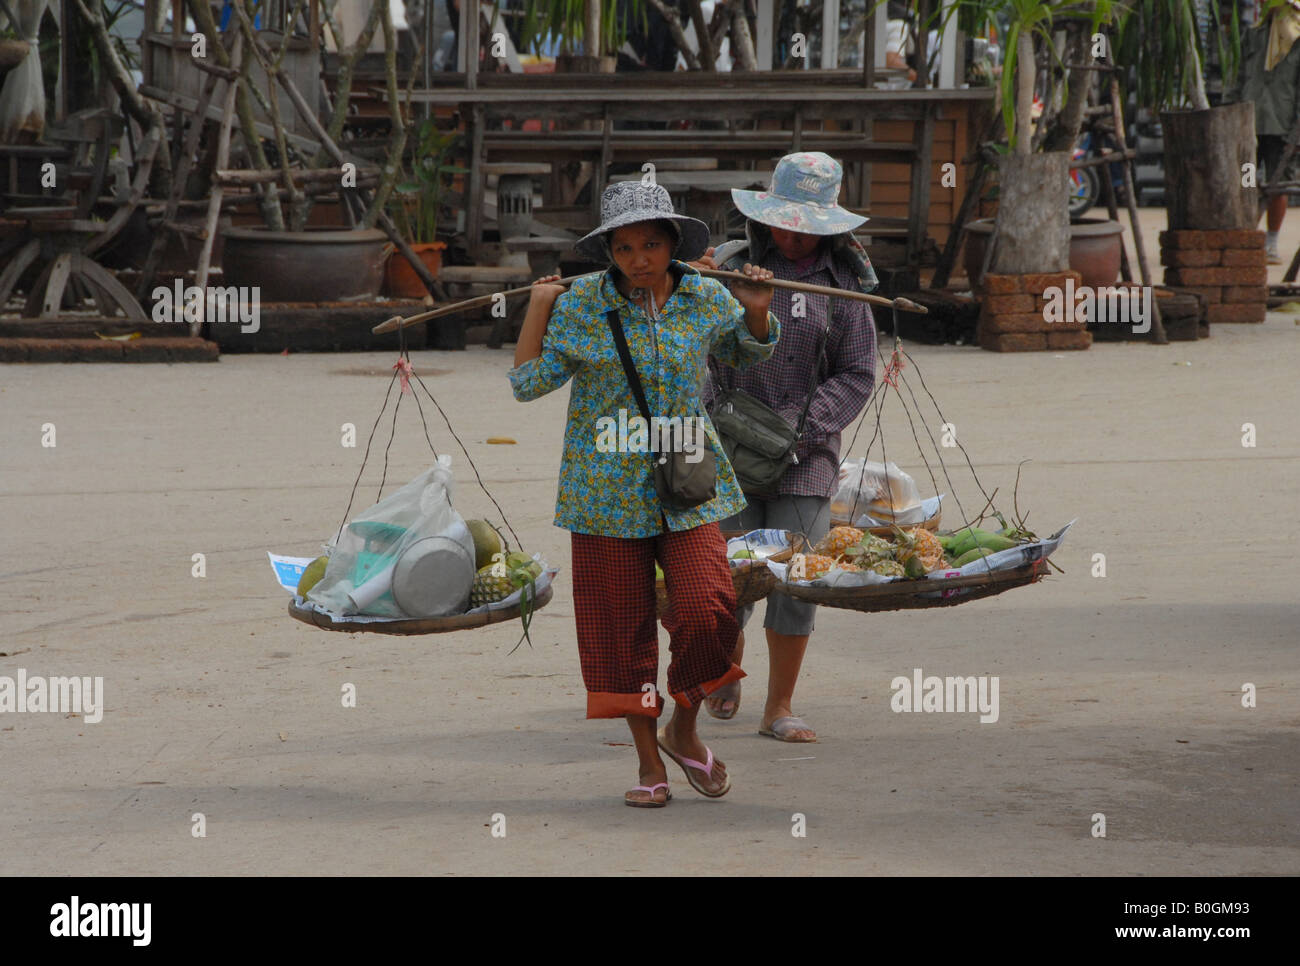 khmer peddlers at thaicambodian border selling fruits Stock Photo